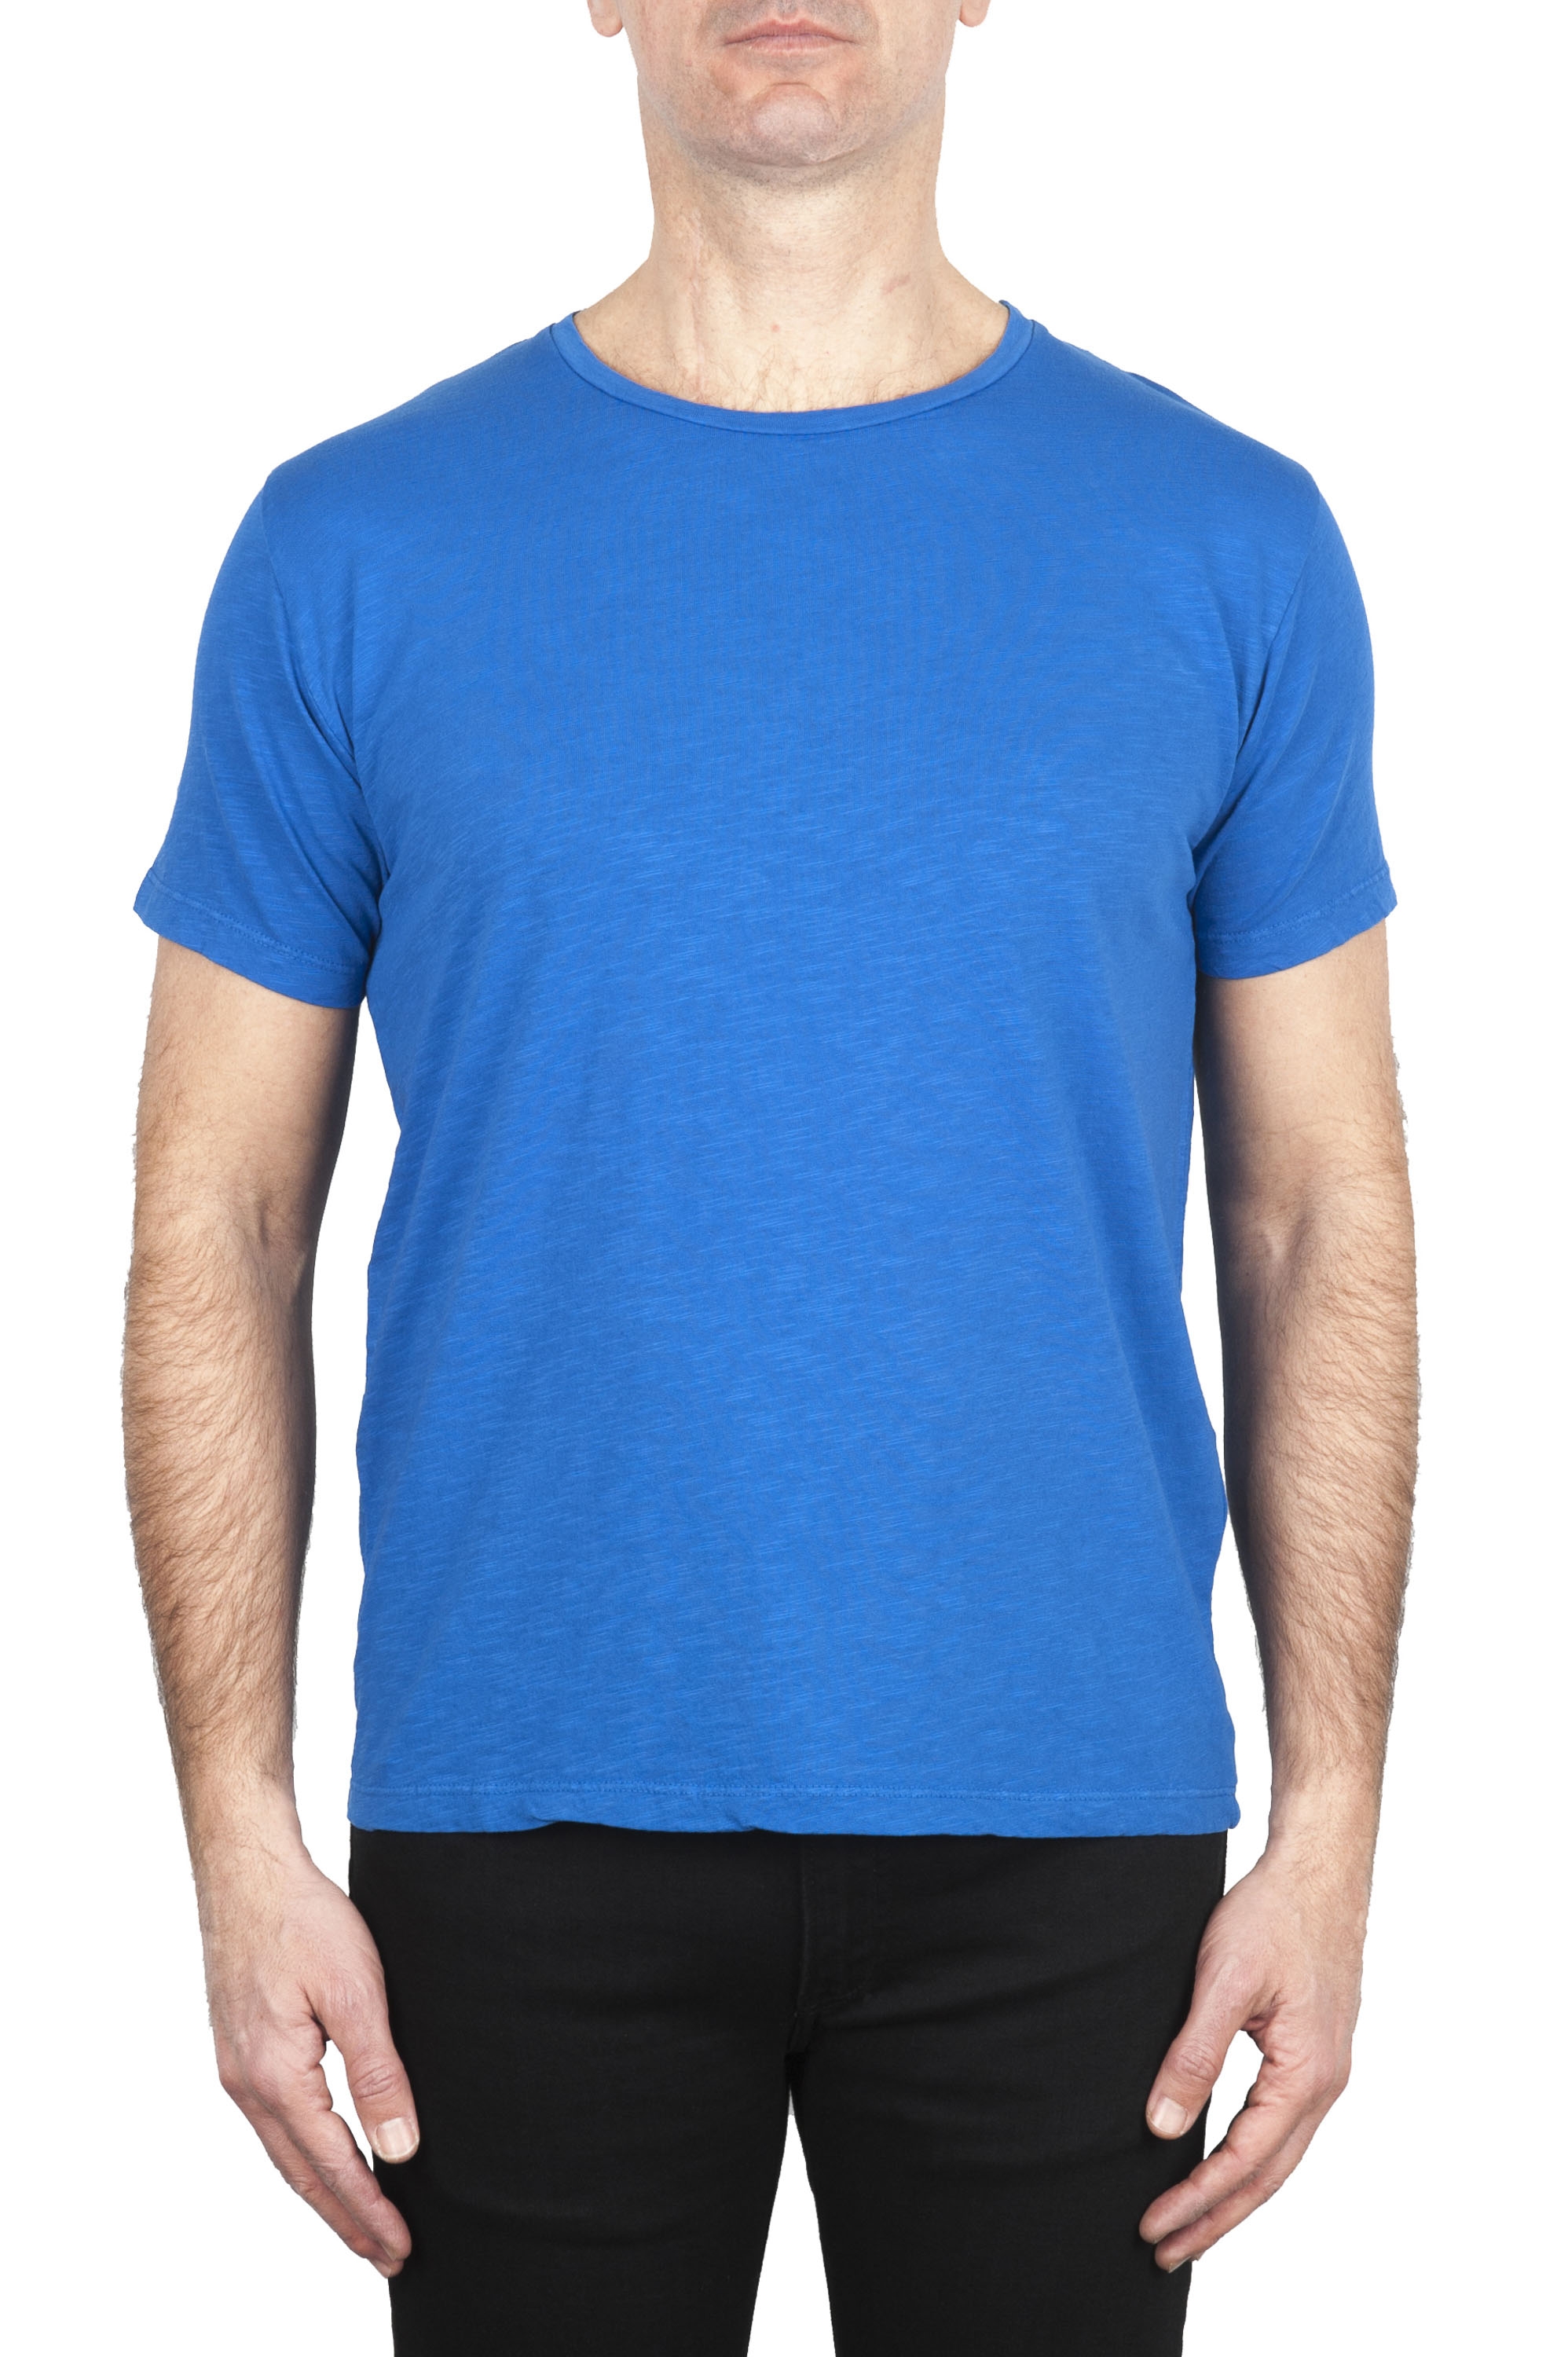 SBU 03064_2020AW Flamed cotton scoop neck t-shirt China blue 01